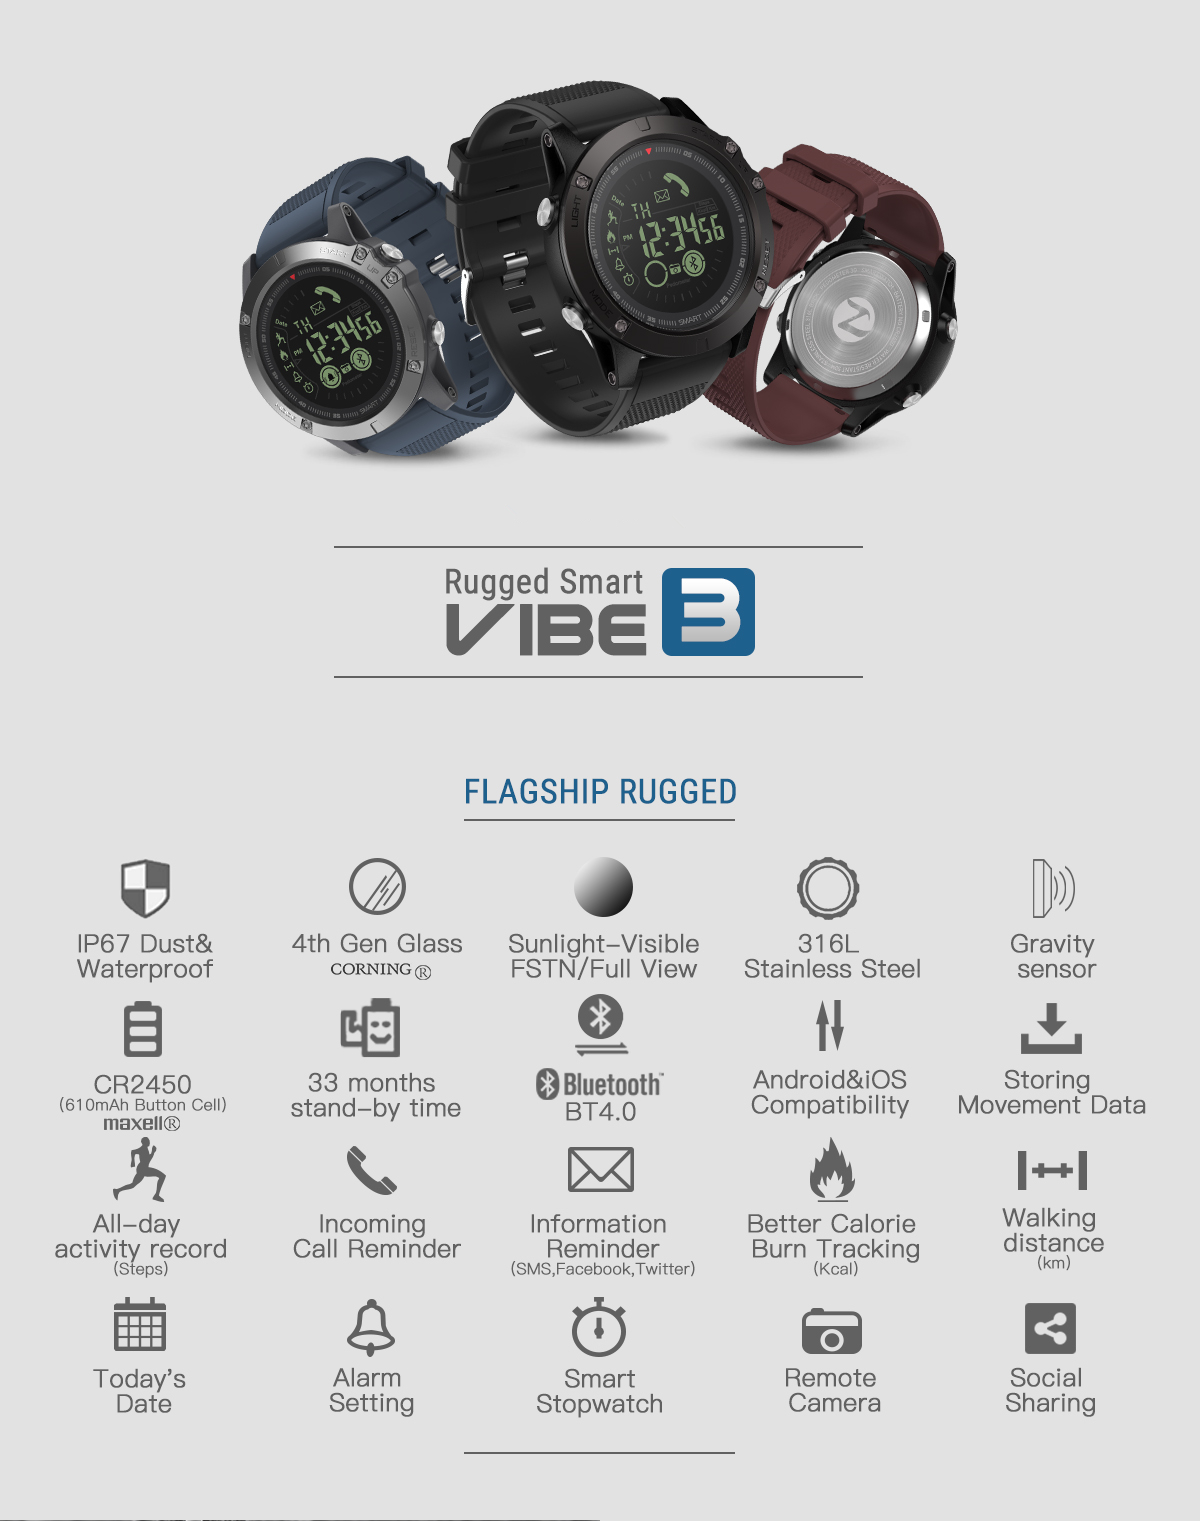 Zeblaze VIBE 3 Flagship Rugged All-day Activity Record Sport 33 Month Long Standby Smart Watch 65